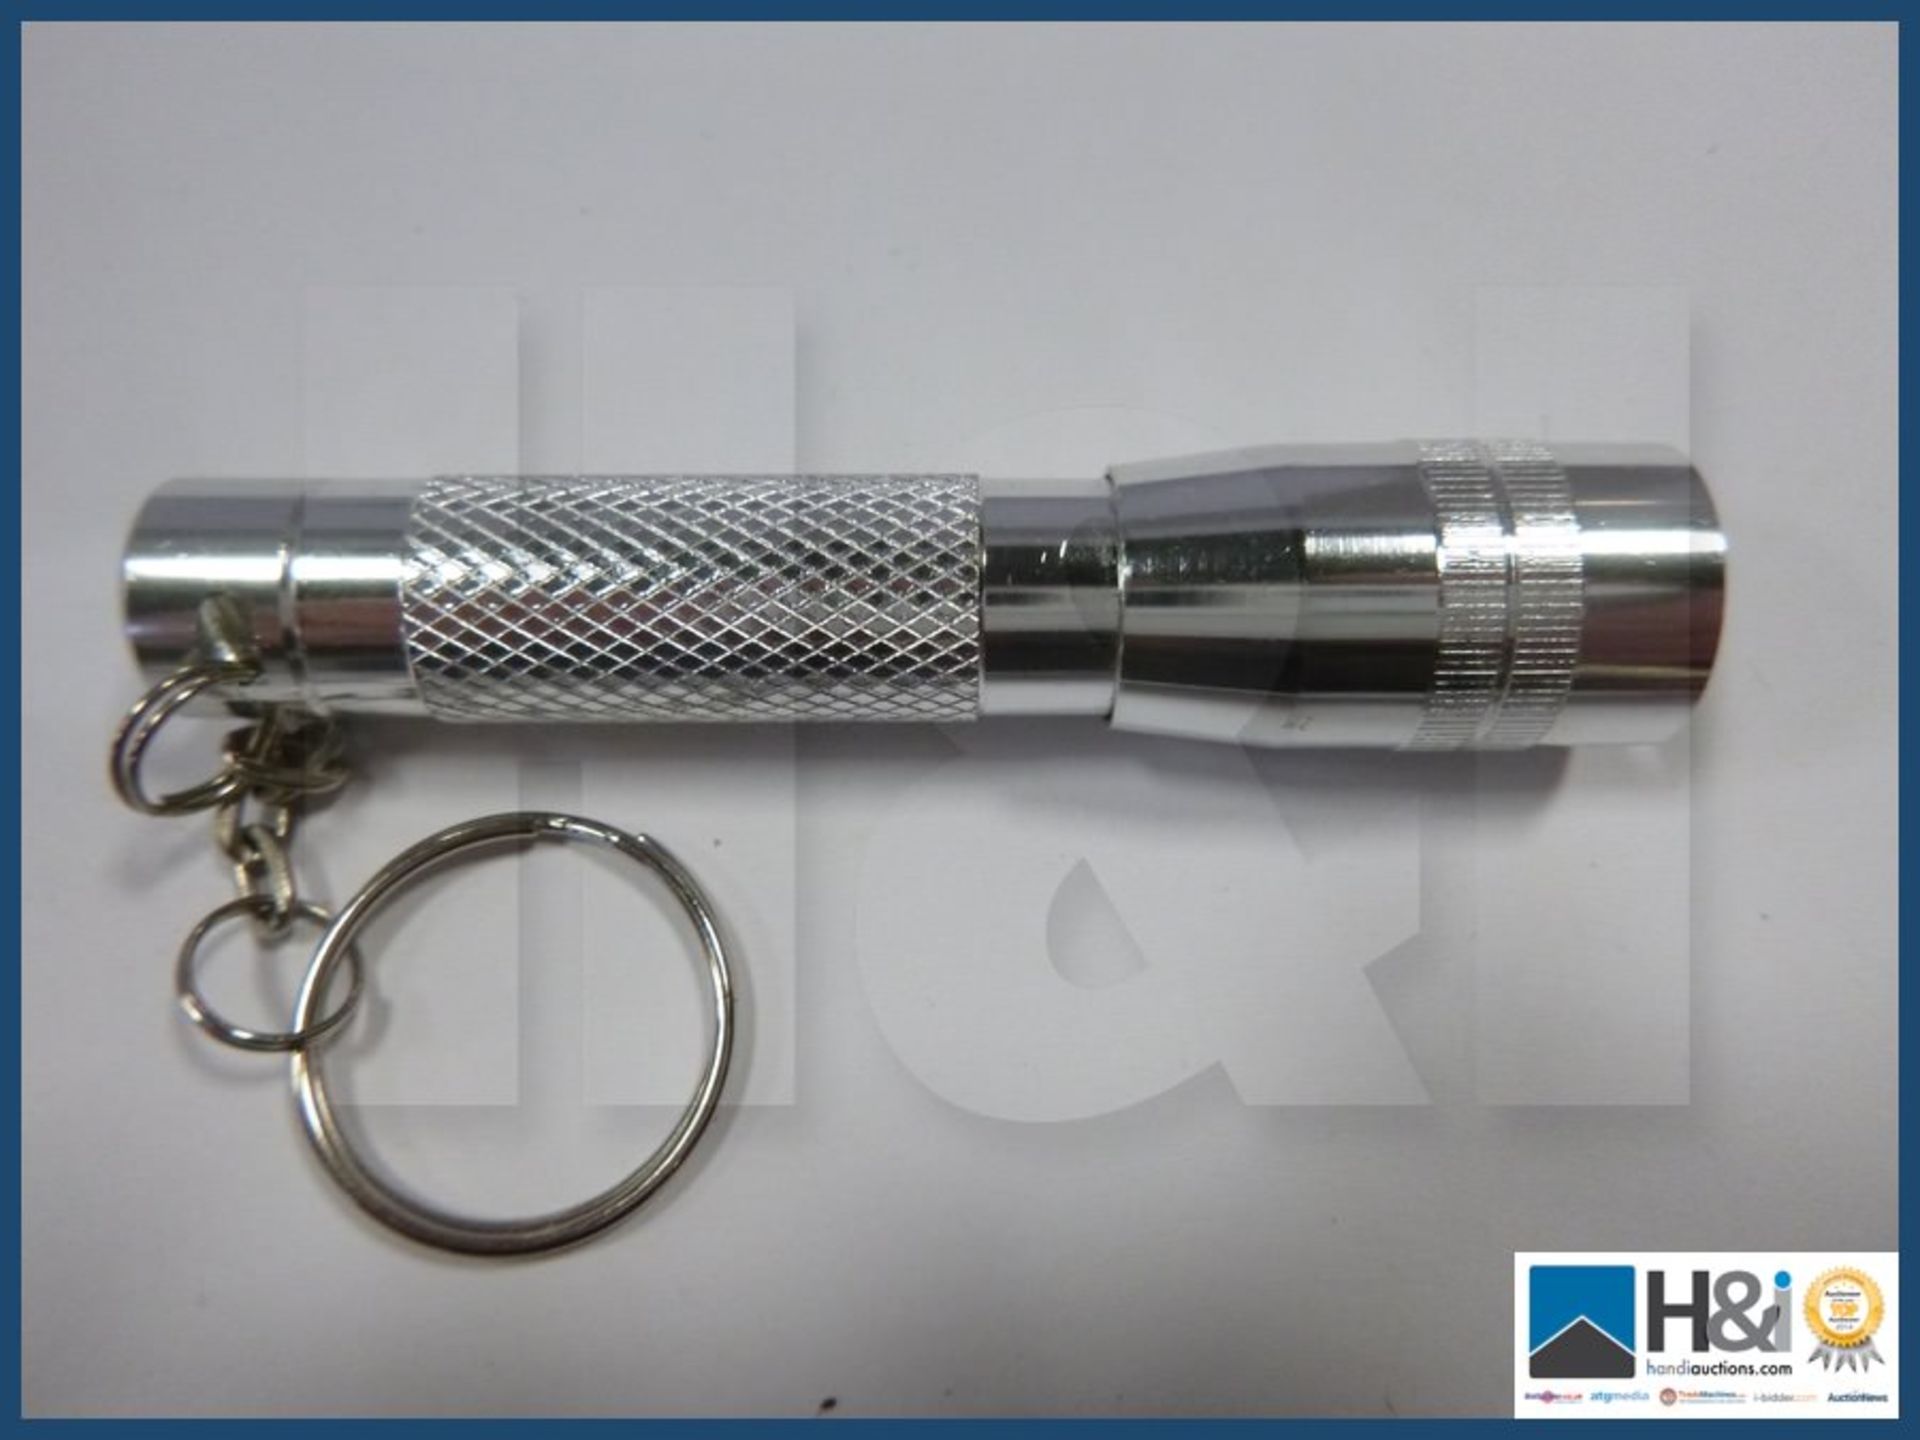 X20 silver key ring torches. - Image 2 of 3